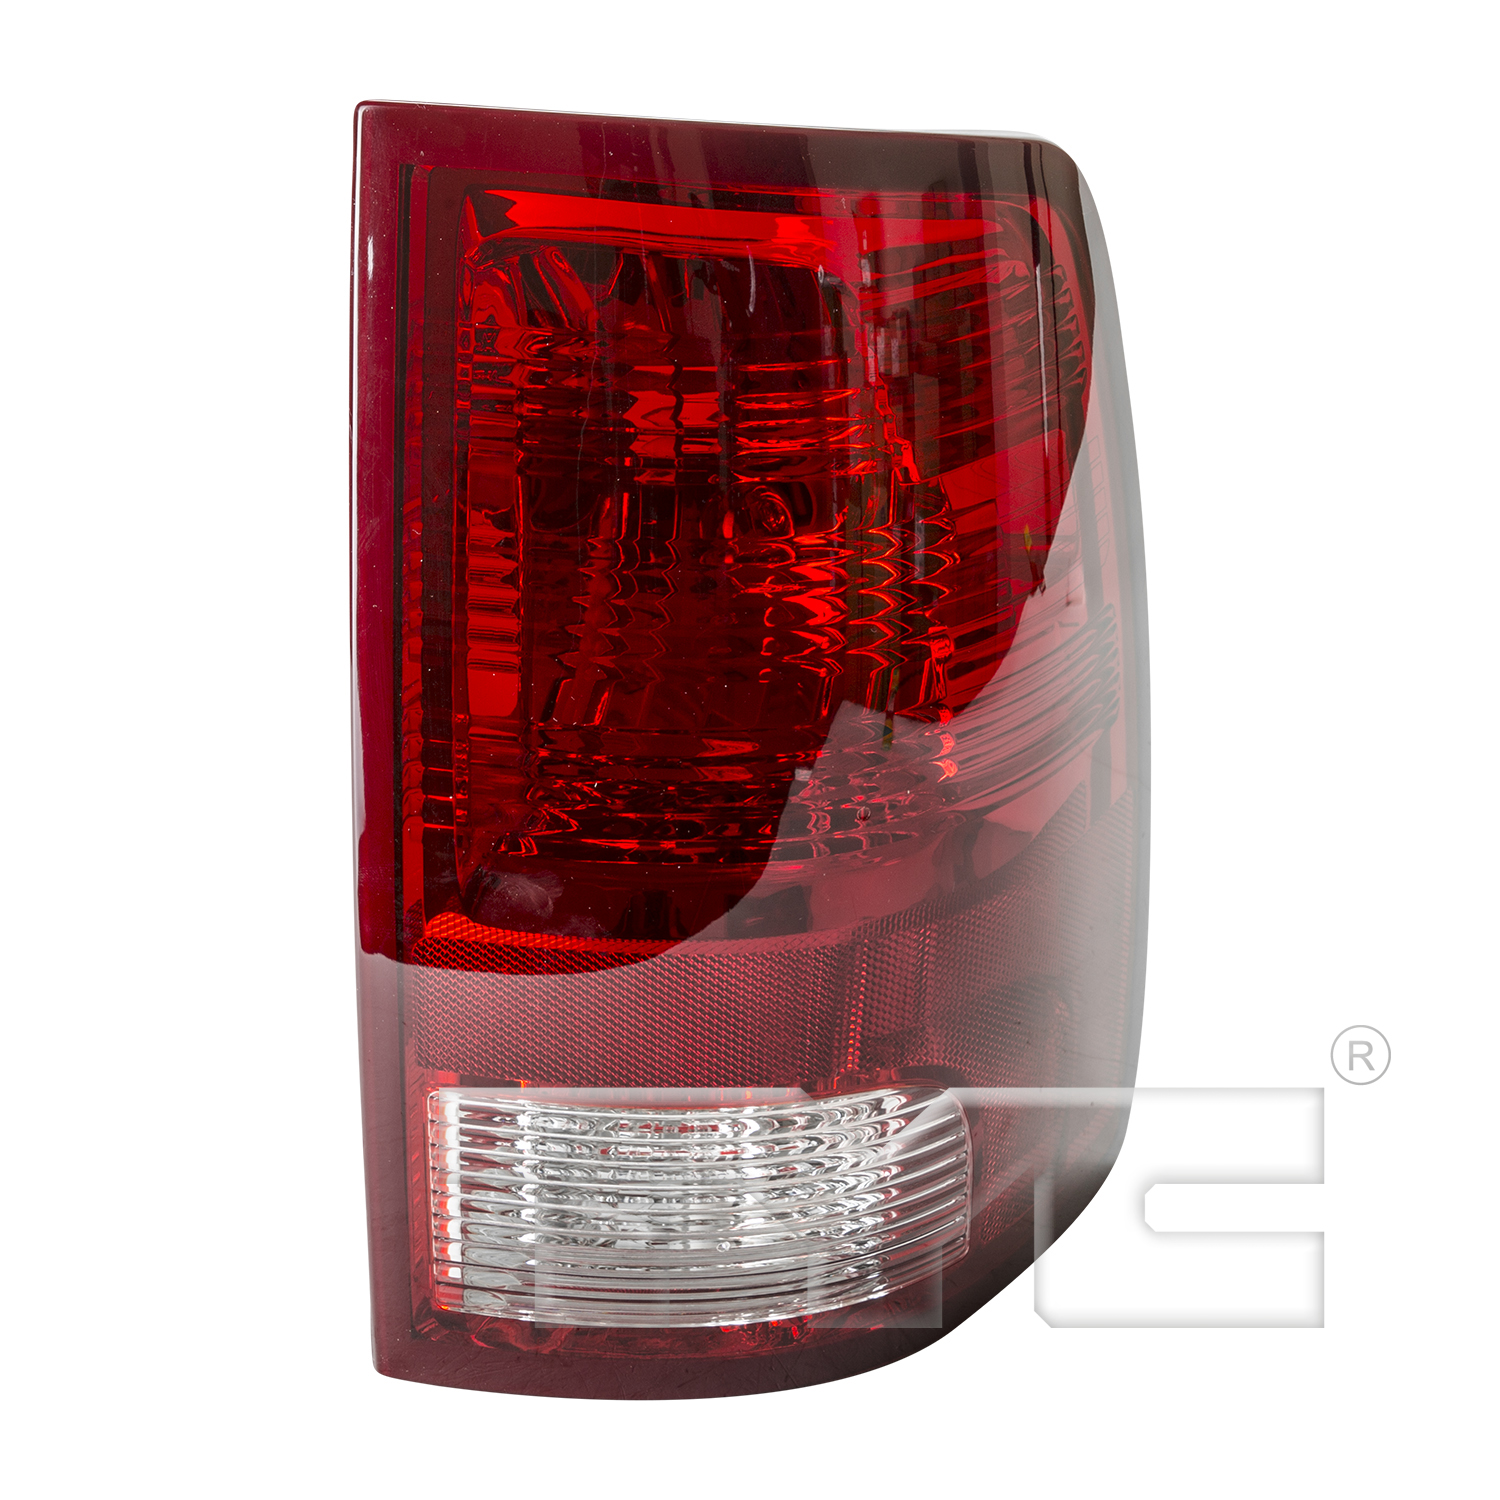 Aftermarket TAILLIGHTS for DODGE - RAM 1500, RAM 1500,09-10,RT Taillamp lens/housing